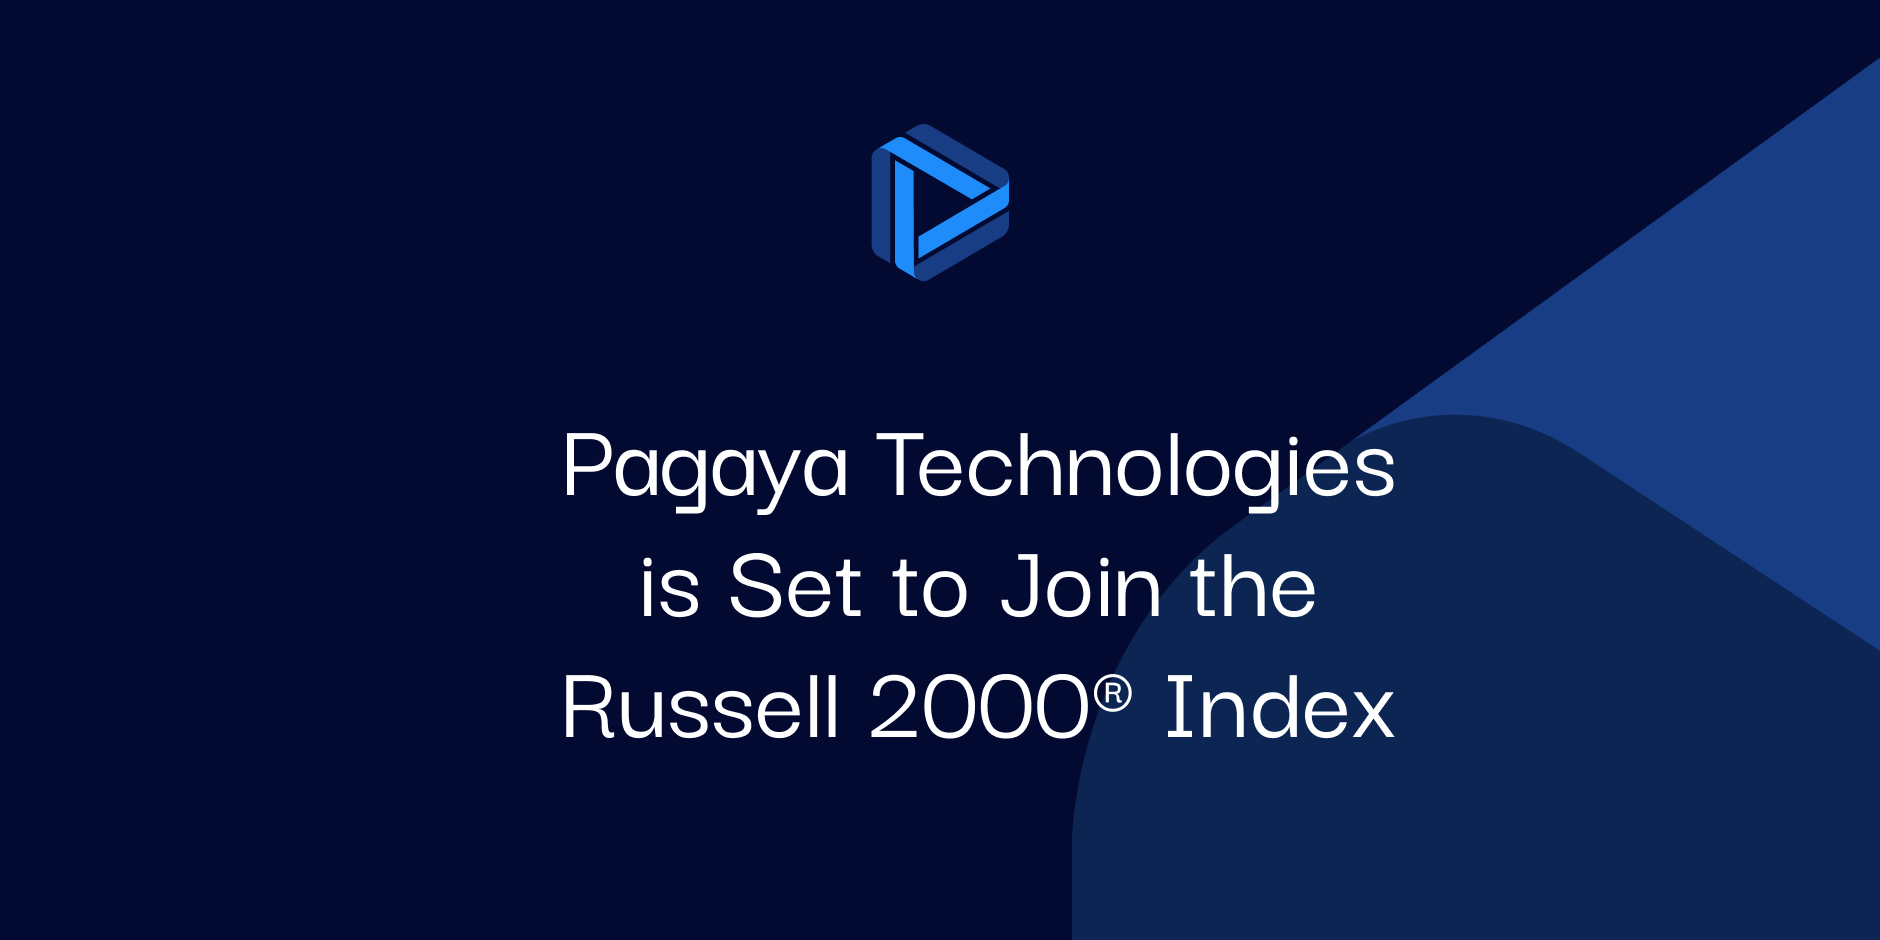 Pagaya Technologies is Set to Join the Russell 2000® Index